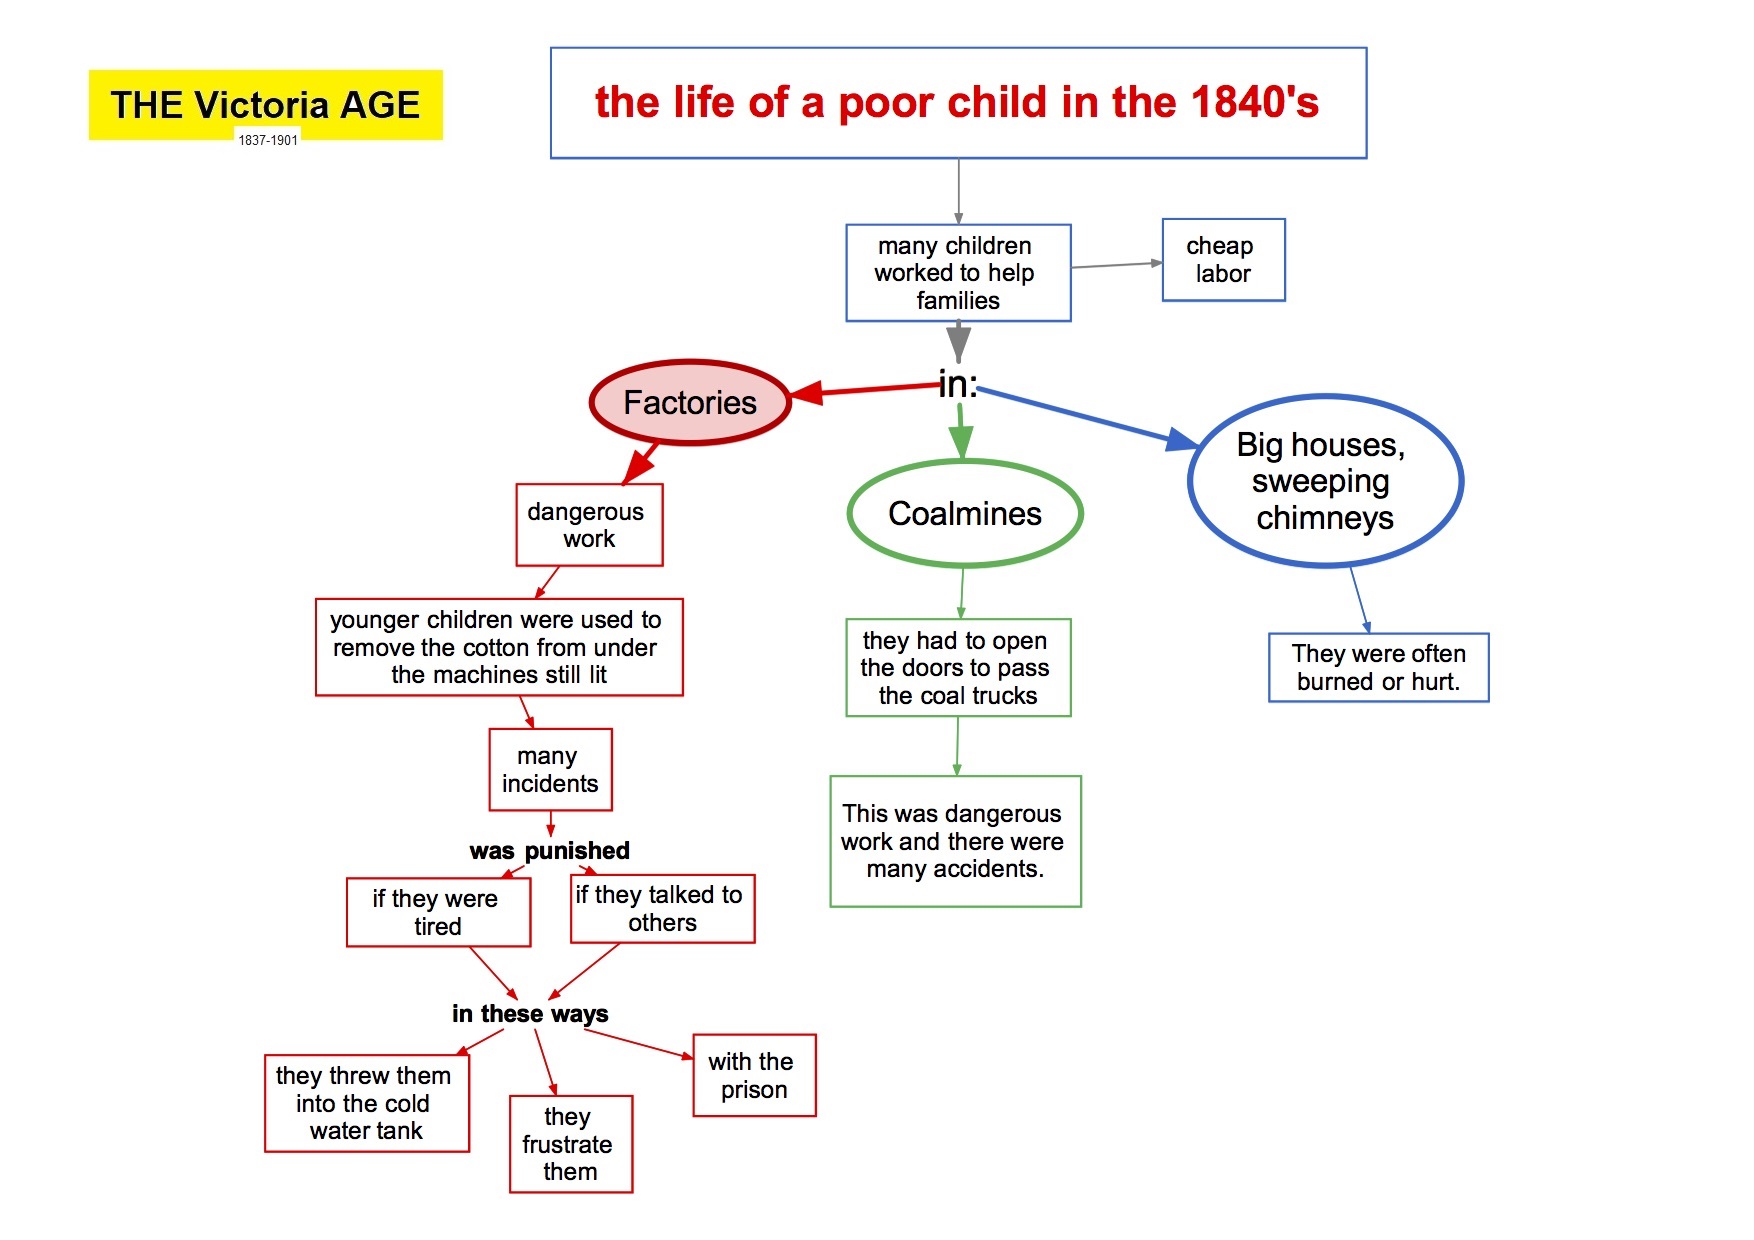 mappa concettuale visual map Inglese THE Victoria AGE the life of a poor child in the 1840's